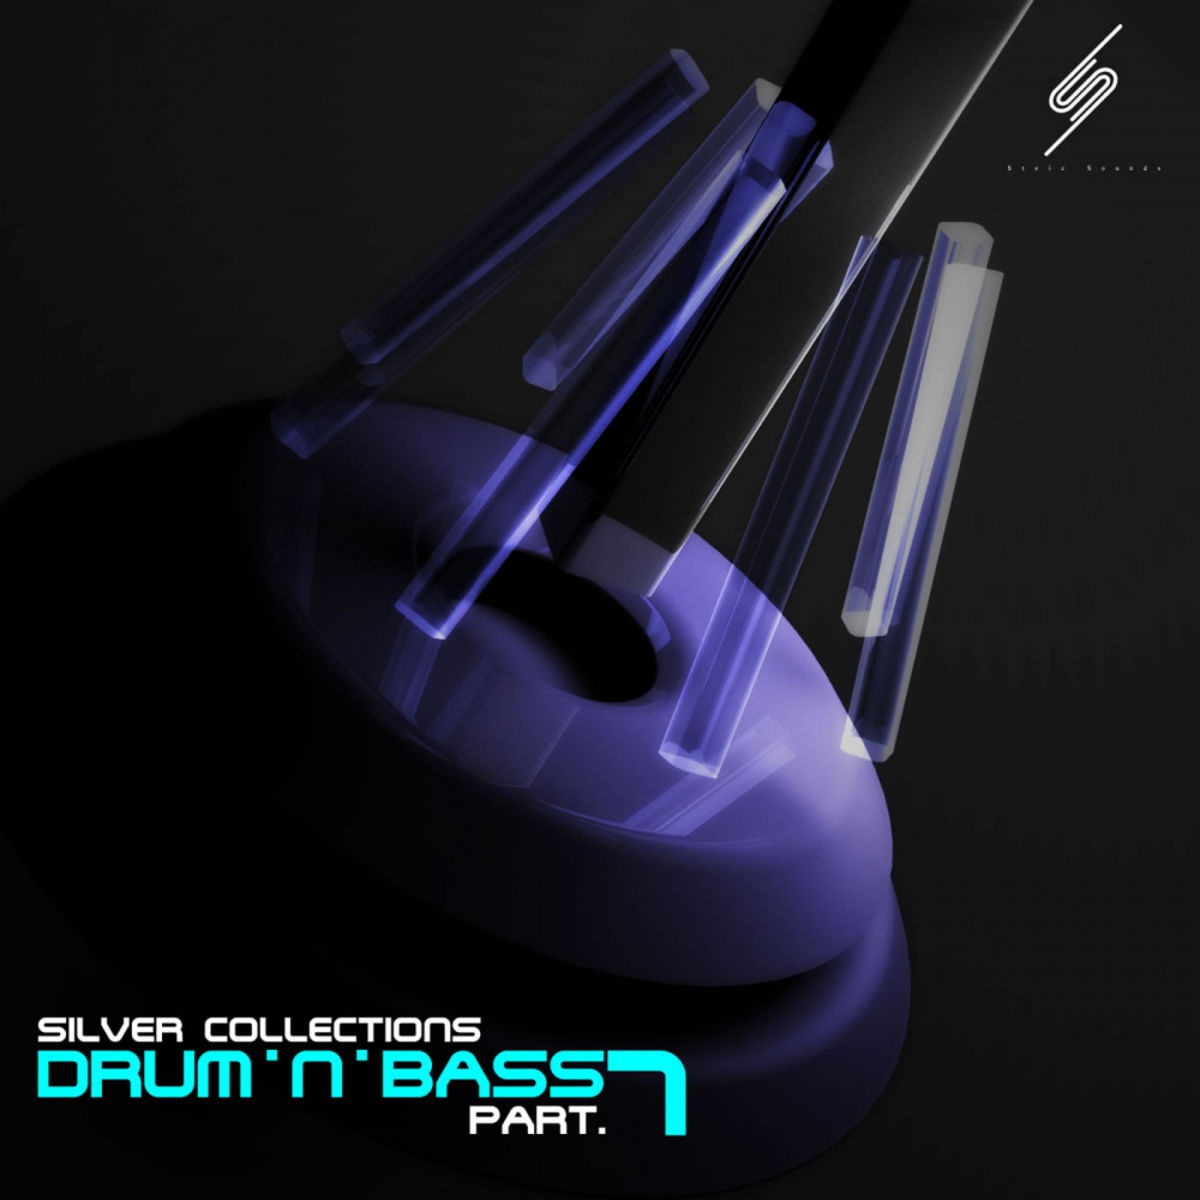 Silver Collections Drum'n'bass, Pt. 7